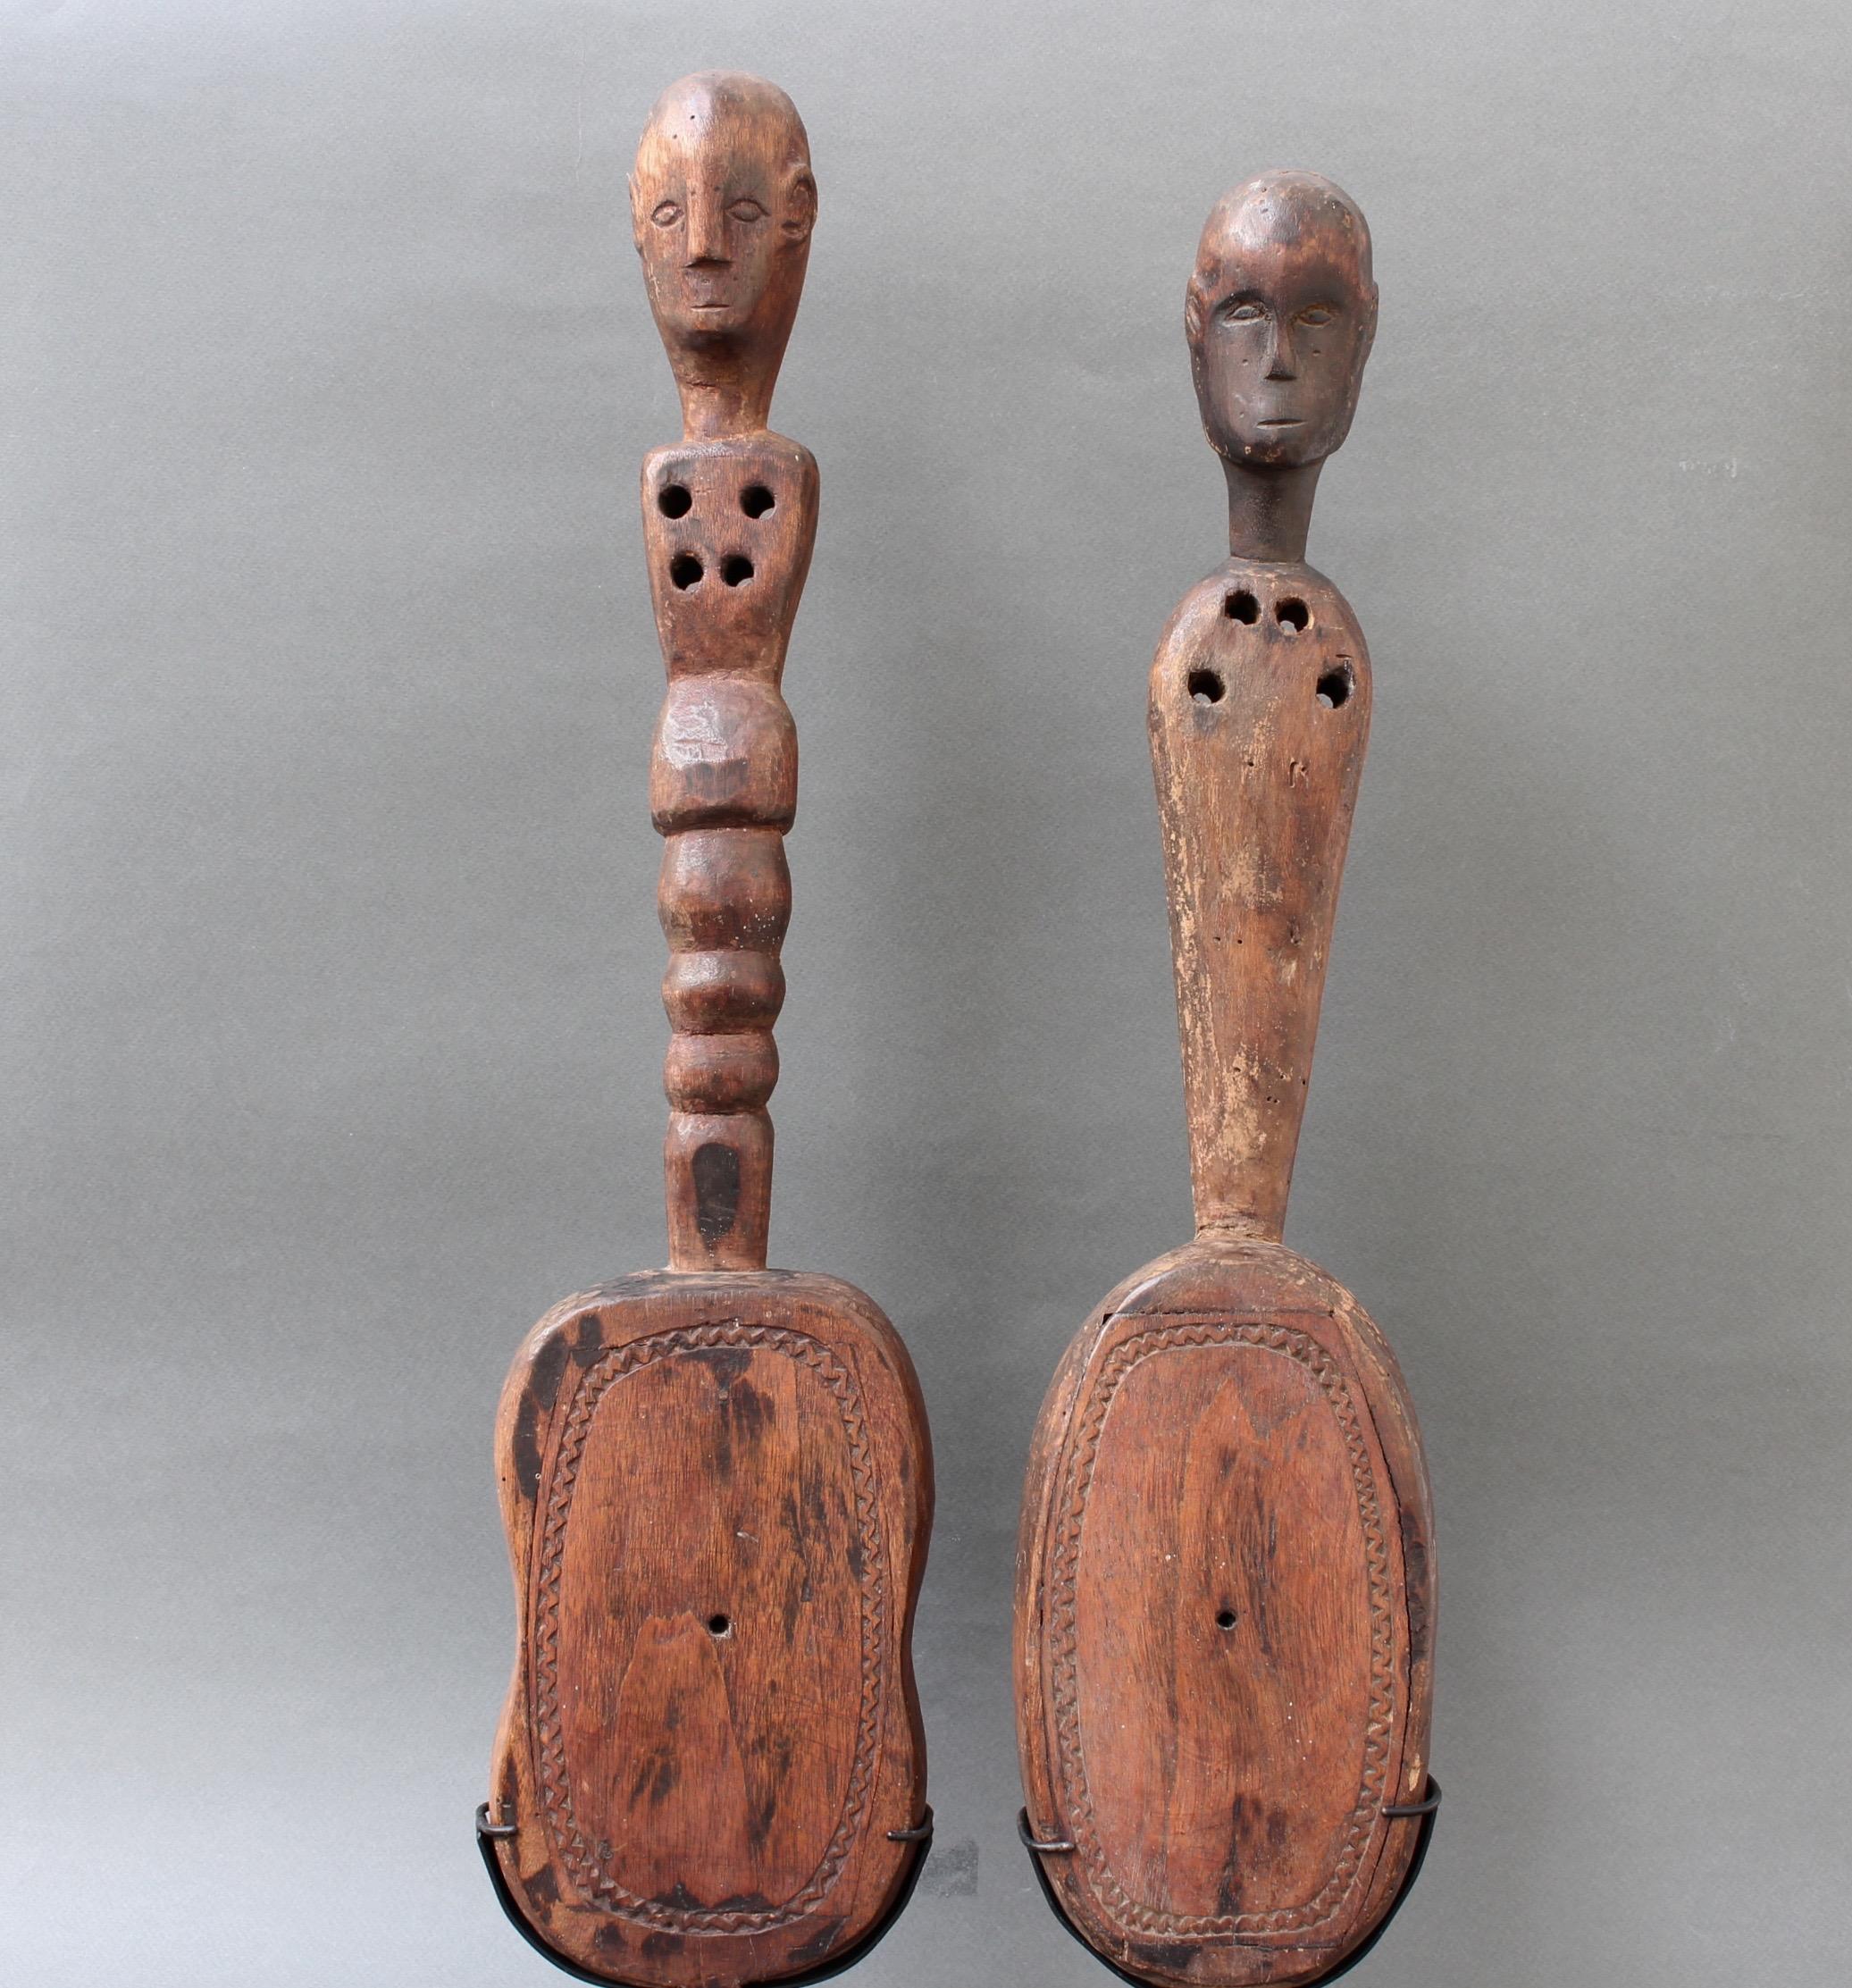 Pair of hardwood lutes from Sumba Island, Indonesia, with anthropomorphic figures (circa early 20th century) on modern metal stands. Music played on these instruments is closely tied to ritual and ceremony. Unusually, this instrument overlaps in the